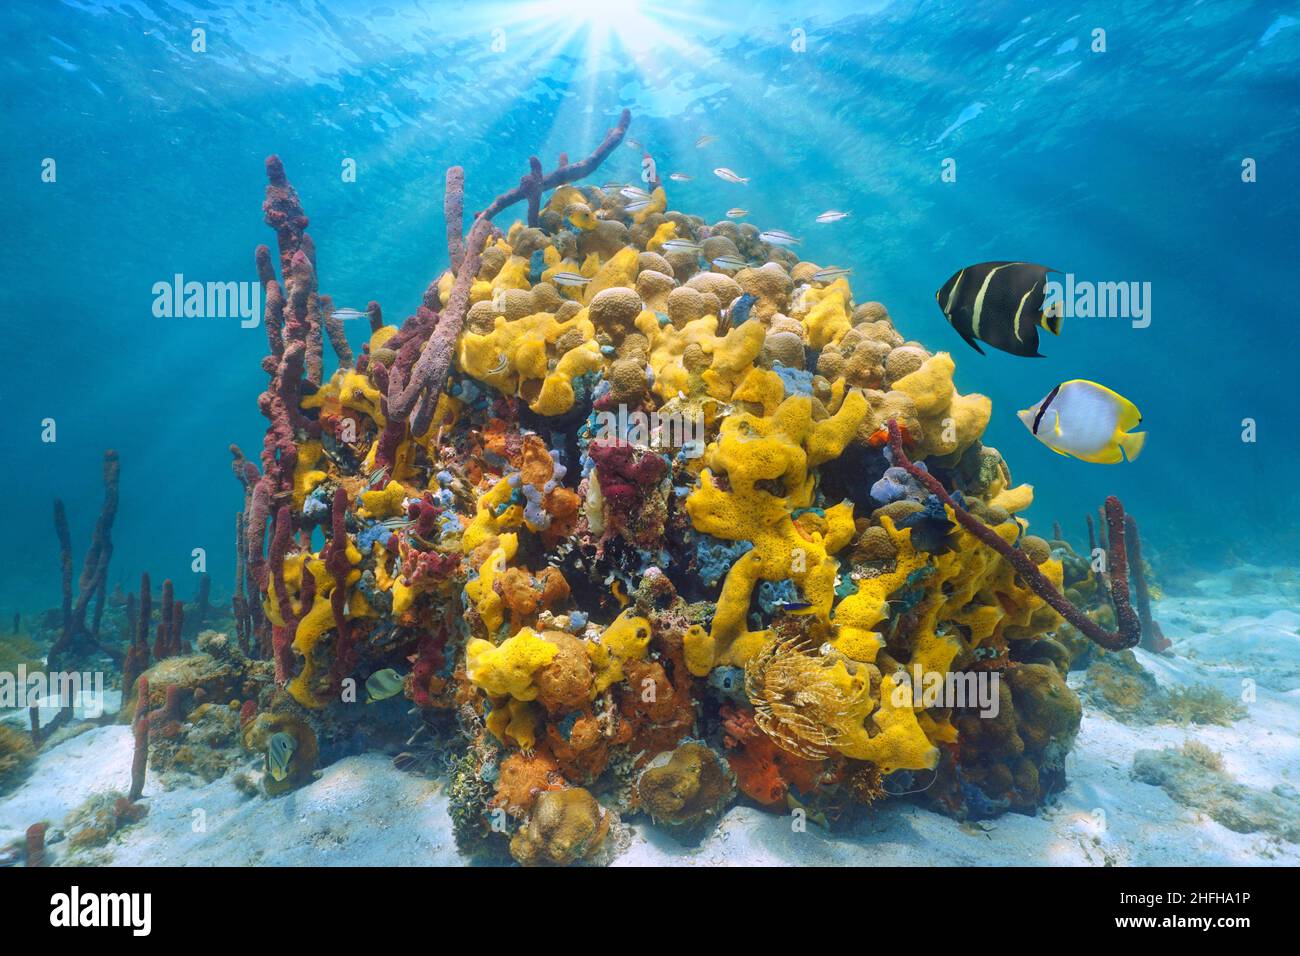 Colorful marine life in the sea, underwater seascape, coral with sea sponges and tropical fish, Caribbean, Central America, Panama Stock Photo